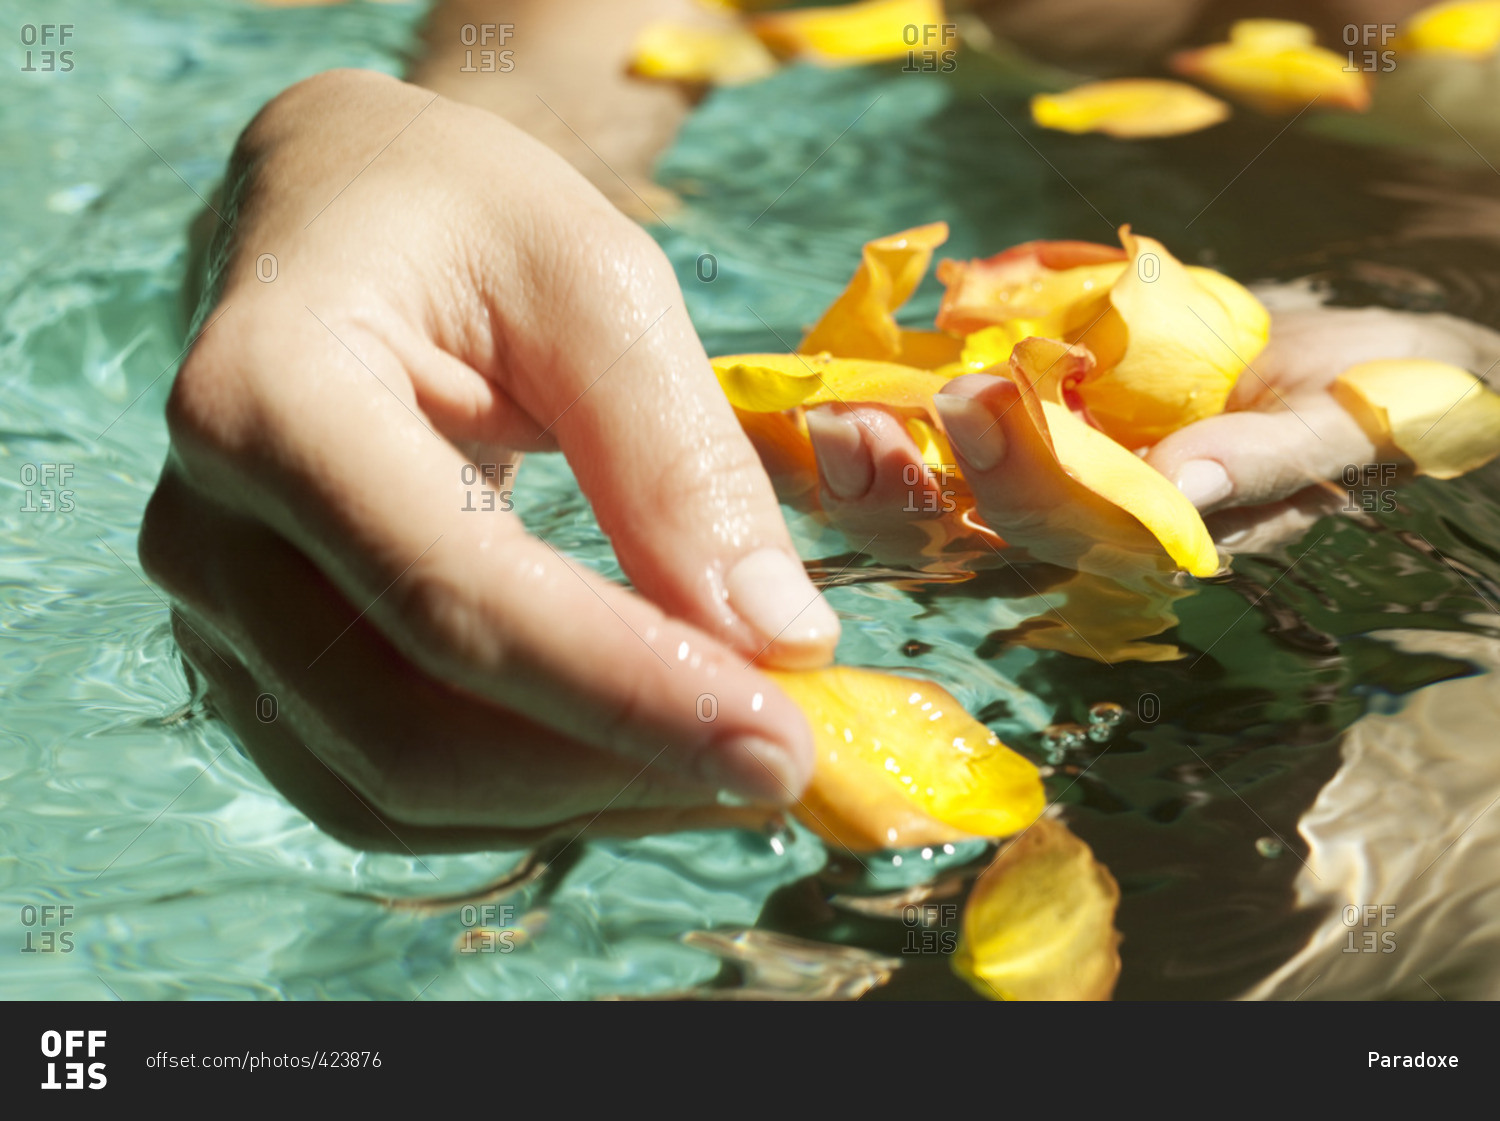 Gathering flower petals floating on water